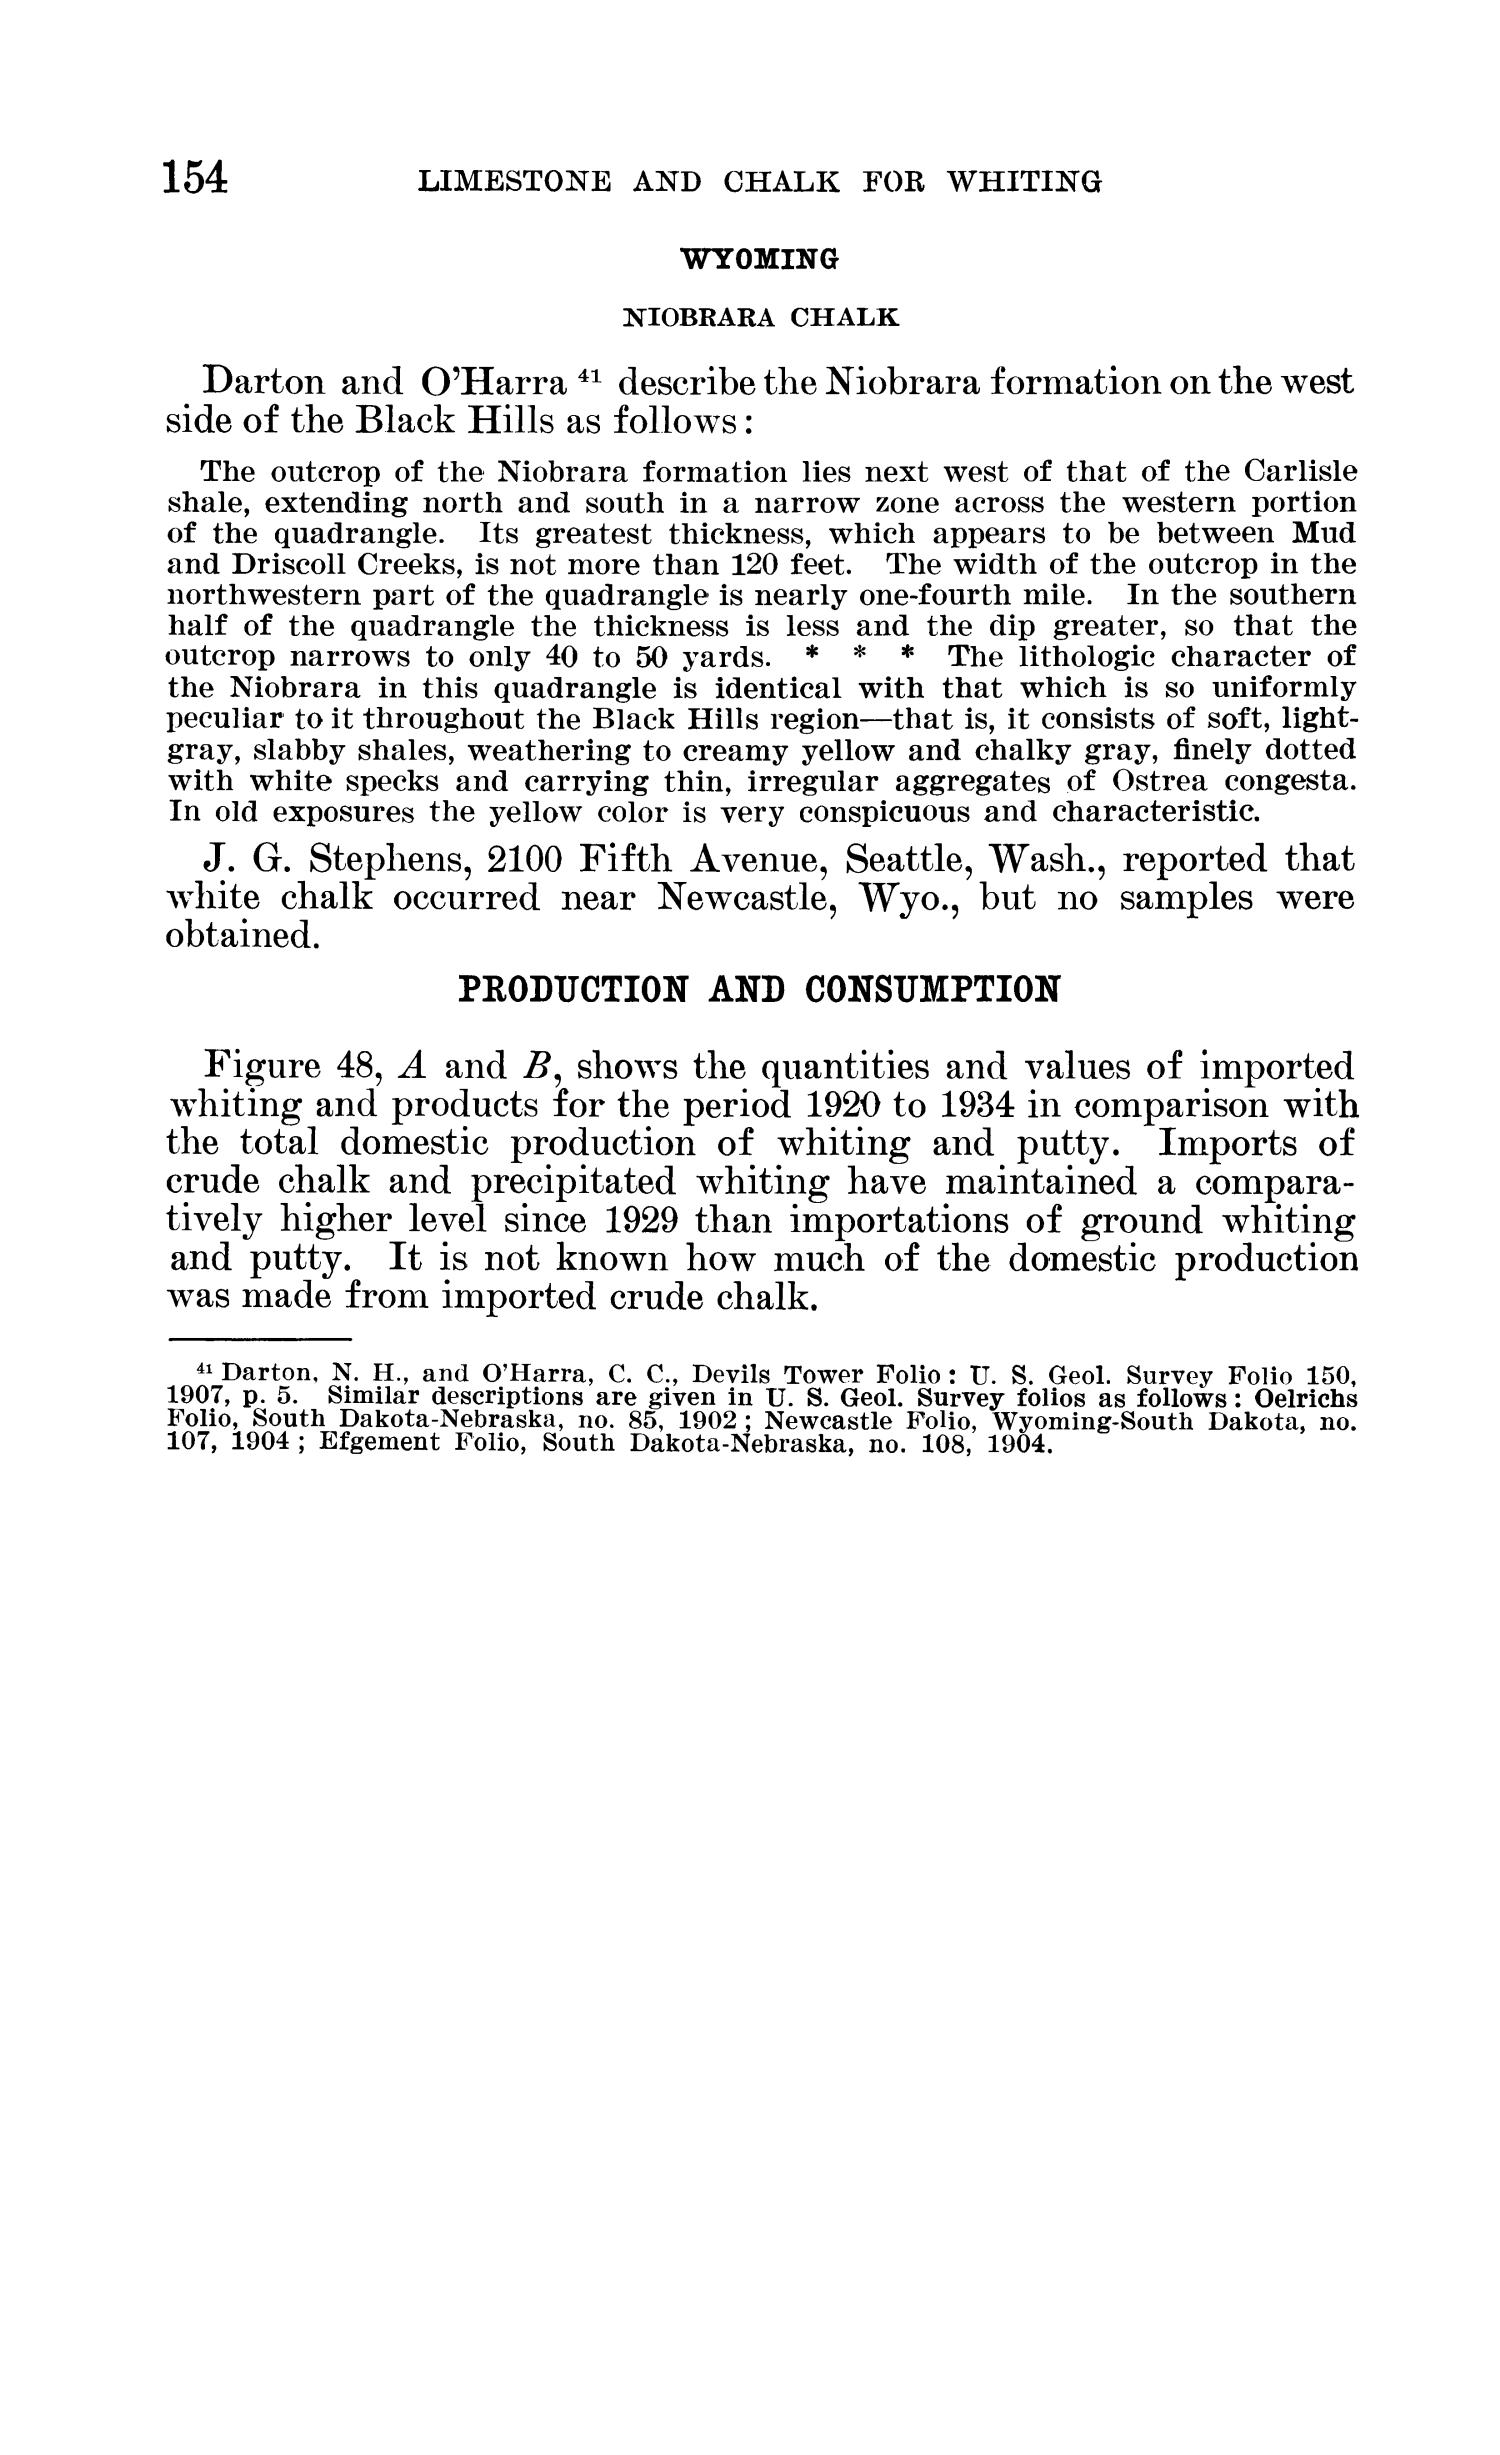 Occurrence Properties And Preparation Of Limestone And Chalk For Whiting Page 154 Unt Digital Library